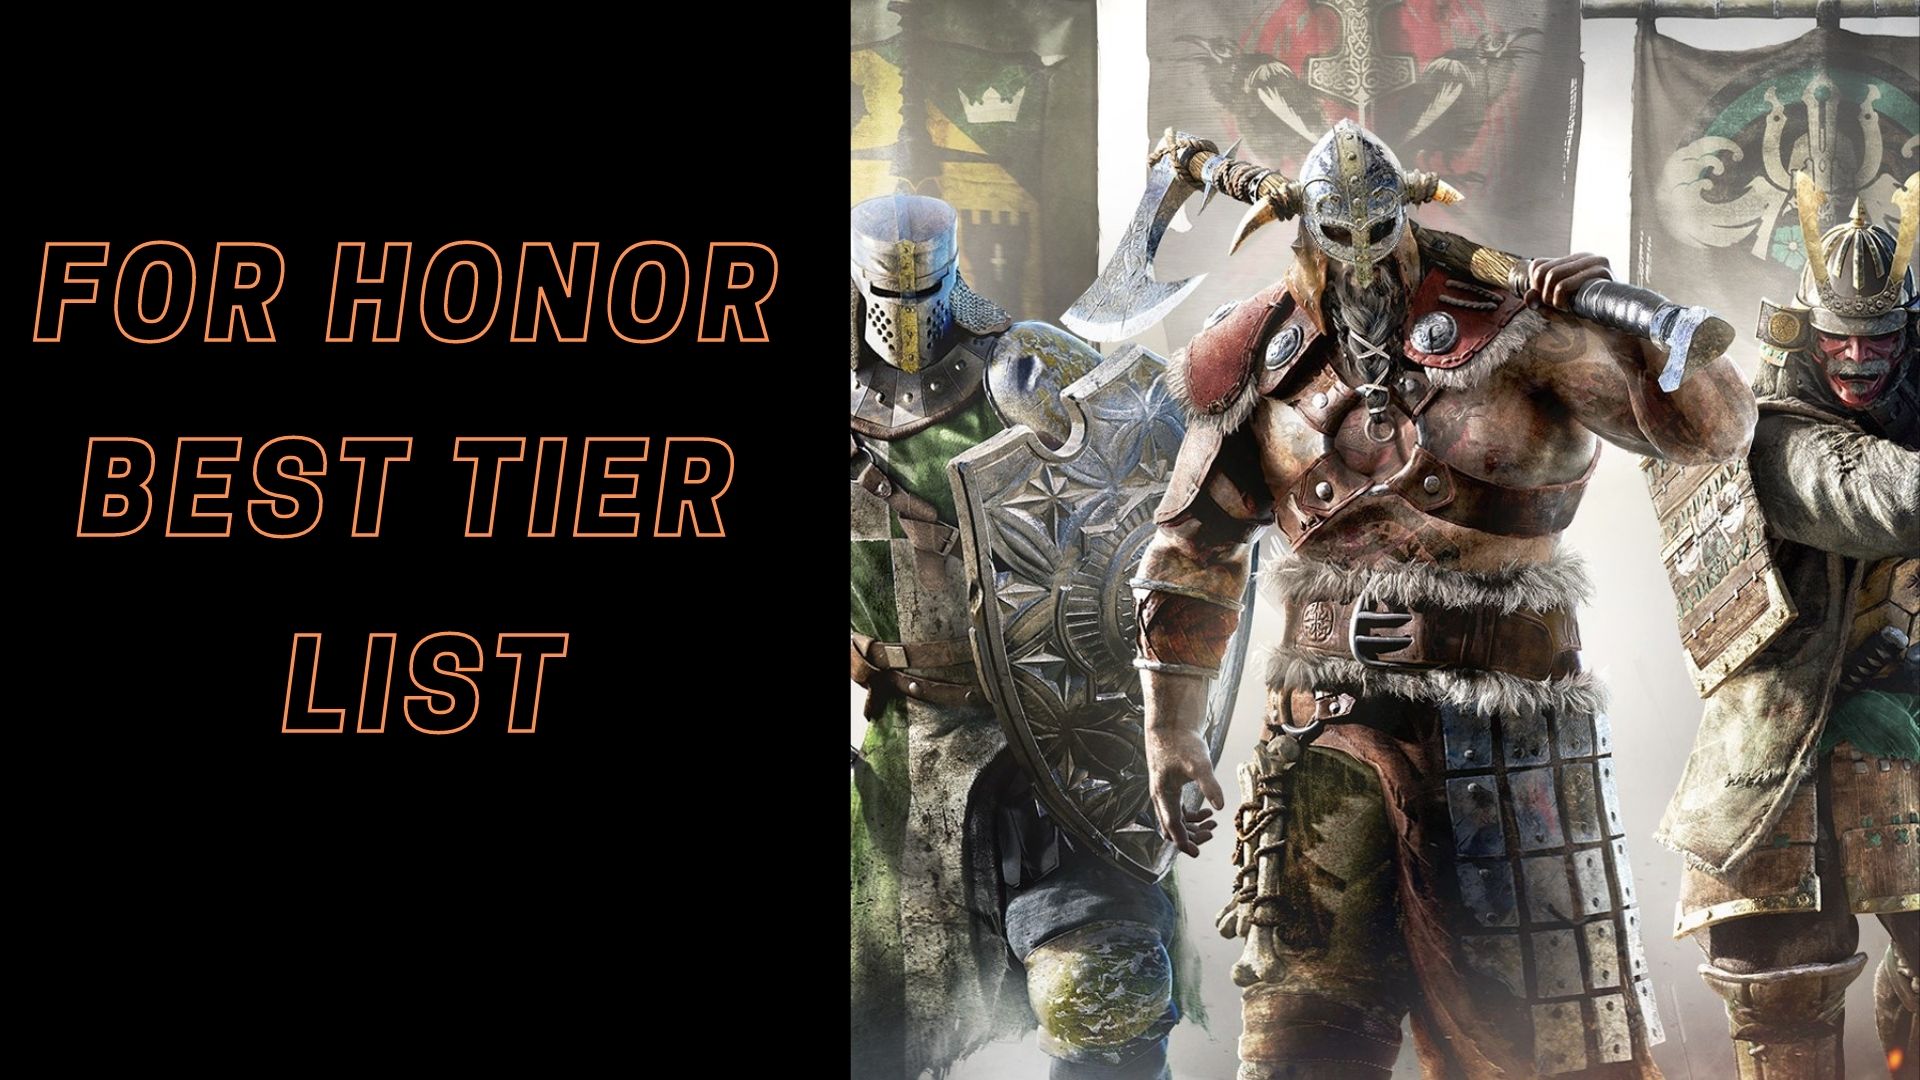 how to play conqueror for honor